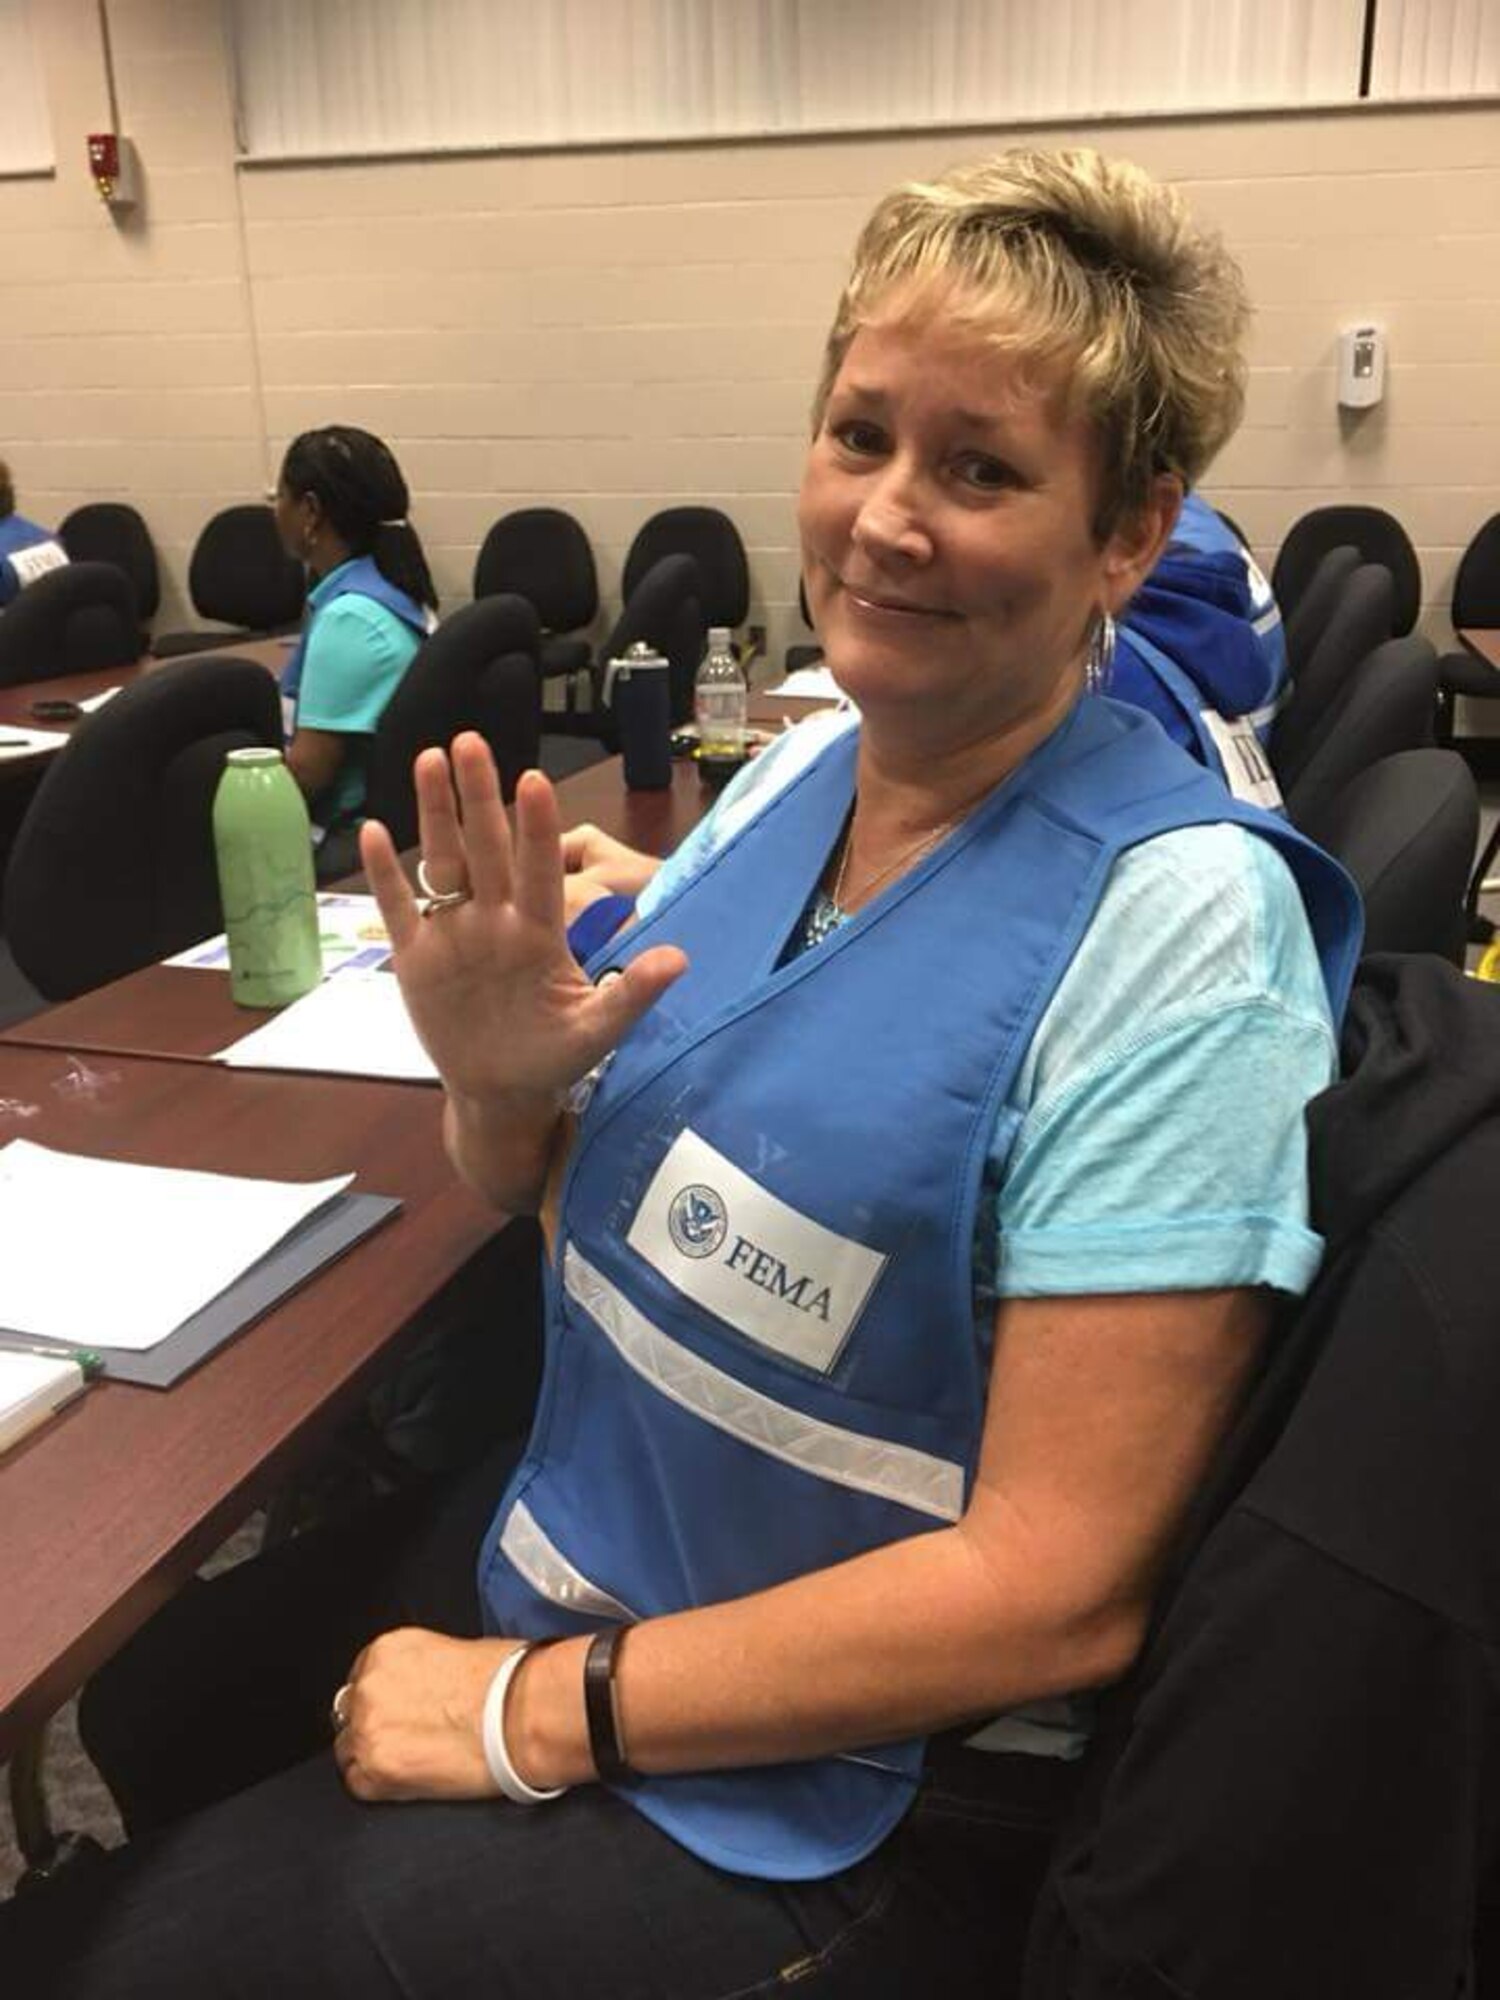 Lorie Bellamy, 436th Airlift Wing occupational safety manager, poses for a photo at a Federal Emergency Management Agency hurricane relief call center in Denton, Texas. Bellamy is one of 70 Air Force civilian volunteers currently assigned to the Department of Homeland Security’s Surge Capacity Force providing aid to Americans affected by Hurricanes Harvey, Irma and Maria. (Courtesy Photo)